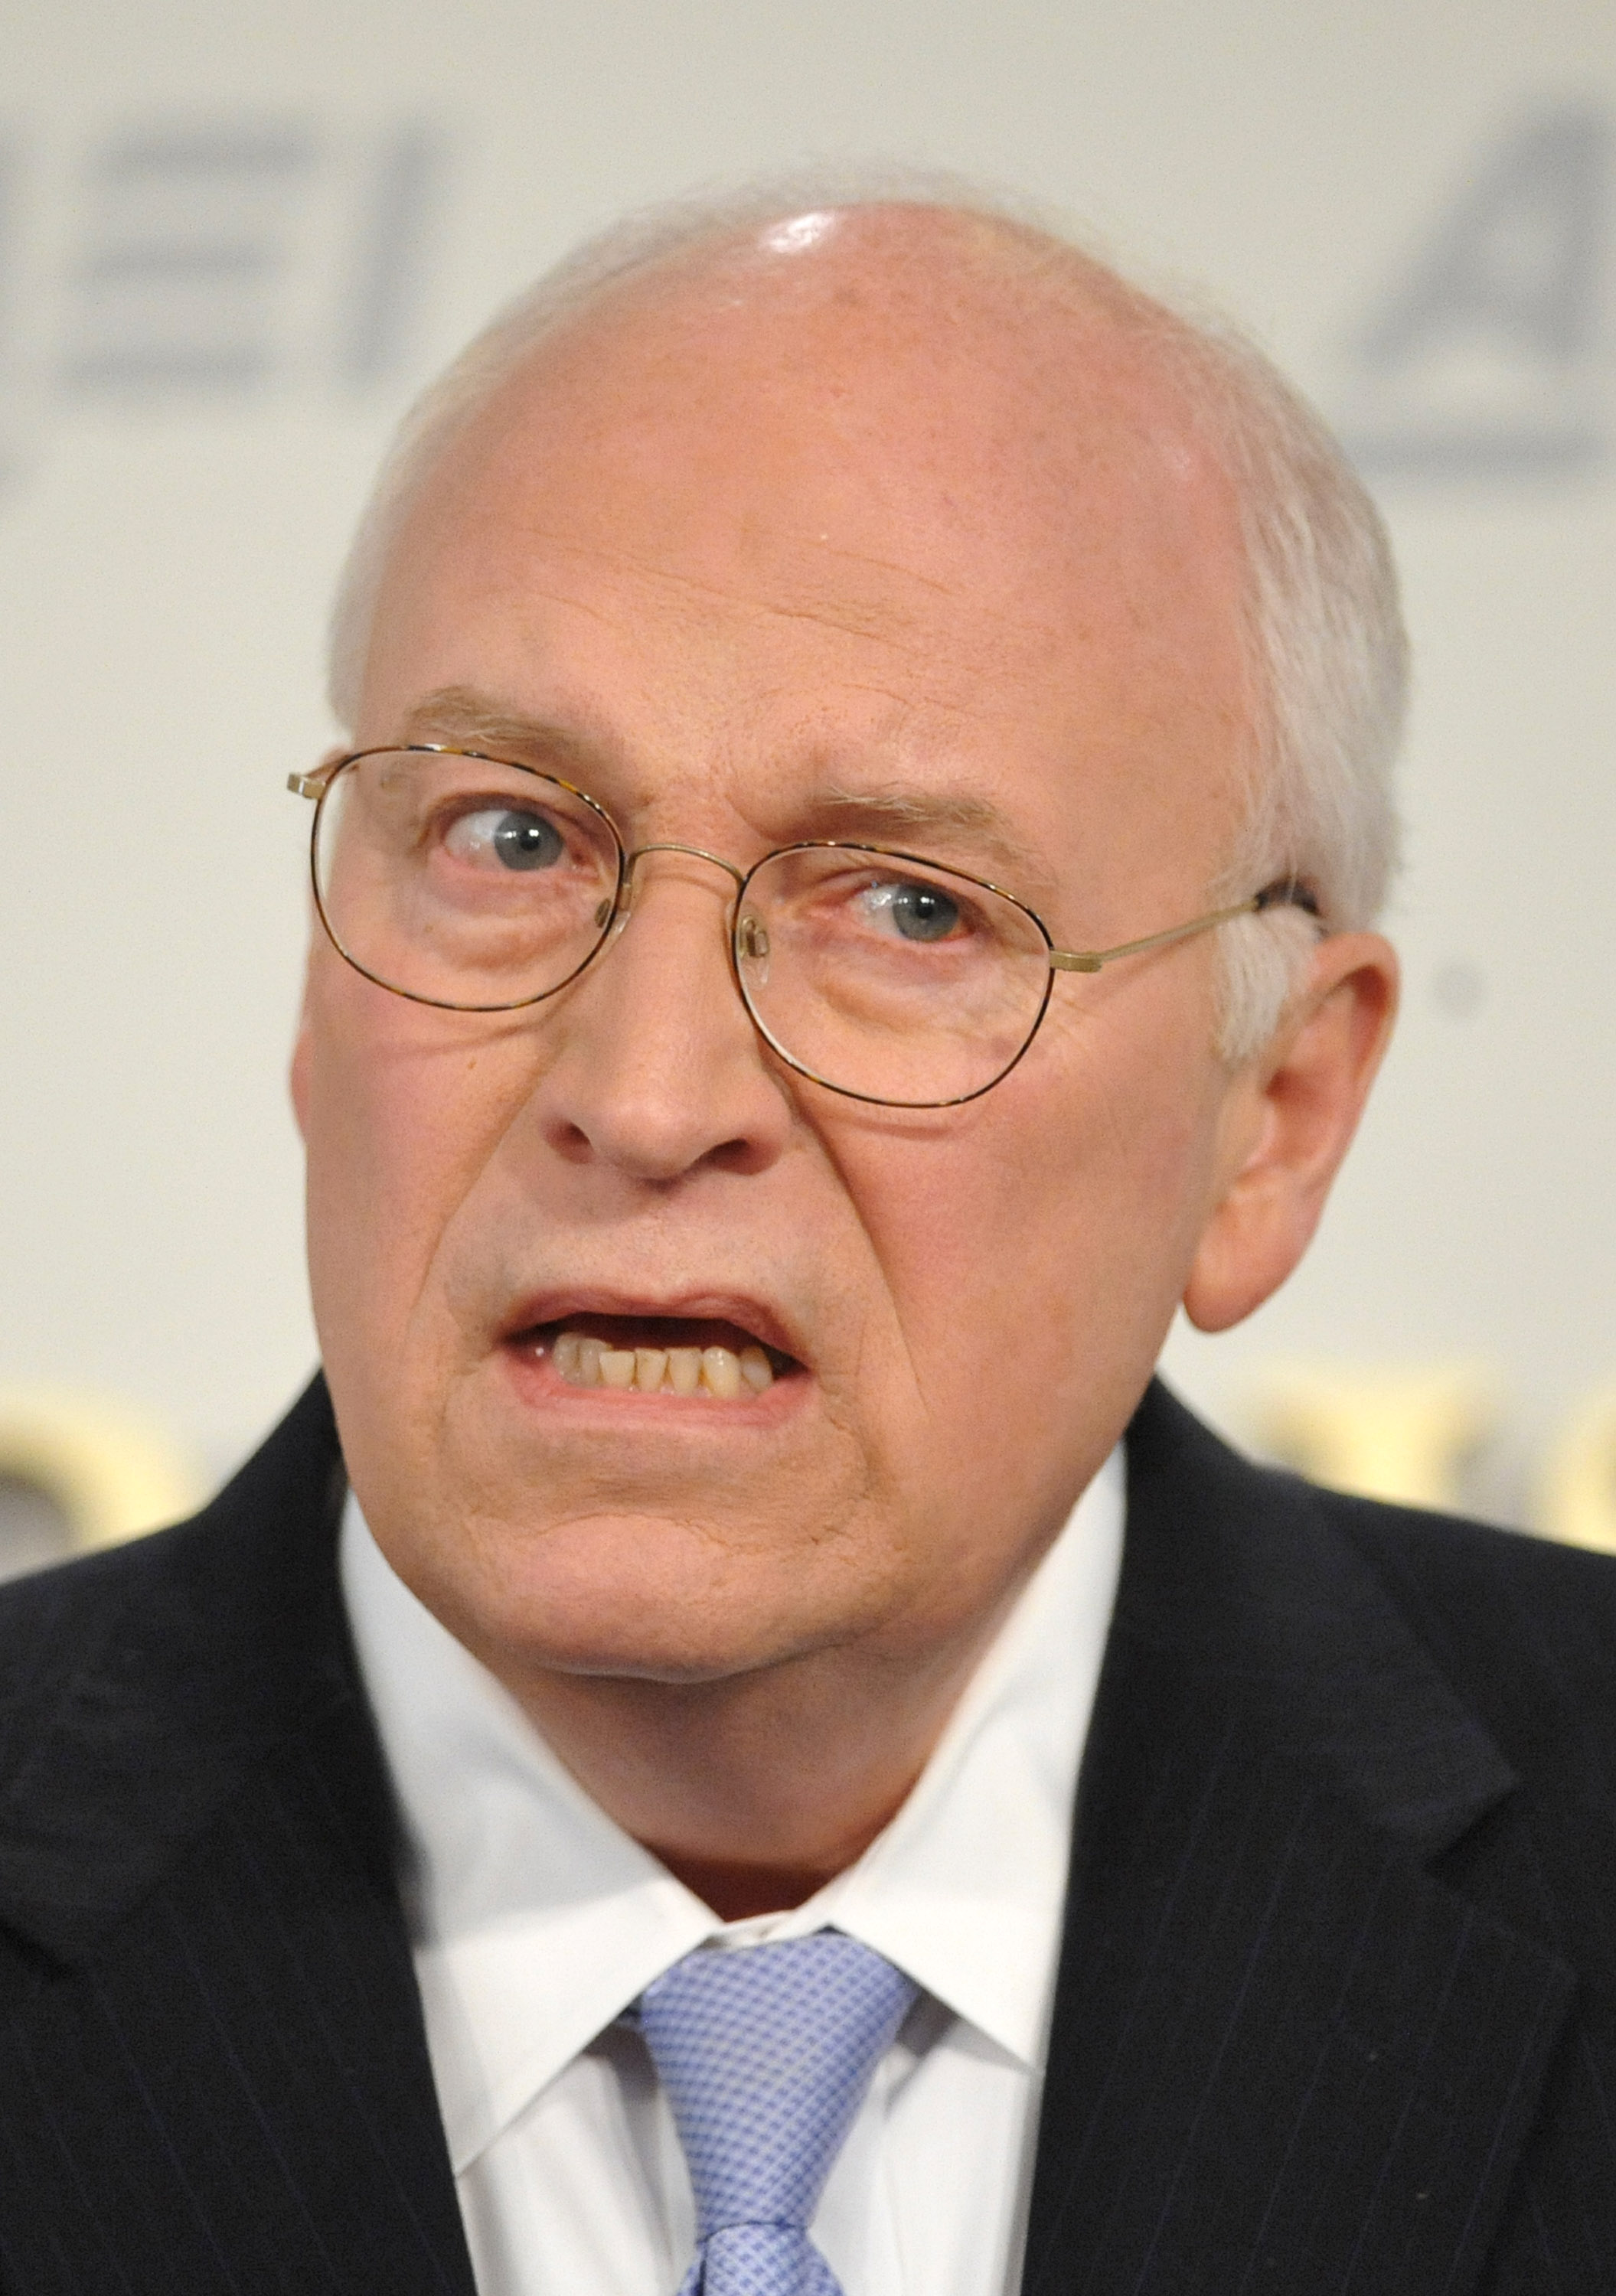 Former Vice President Cheney speaks on National Security Policy in Washington